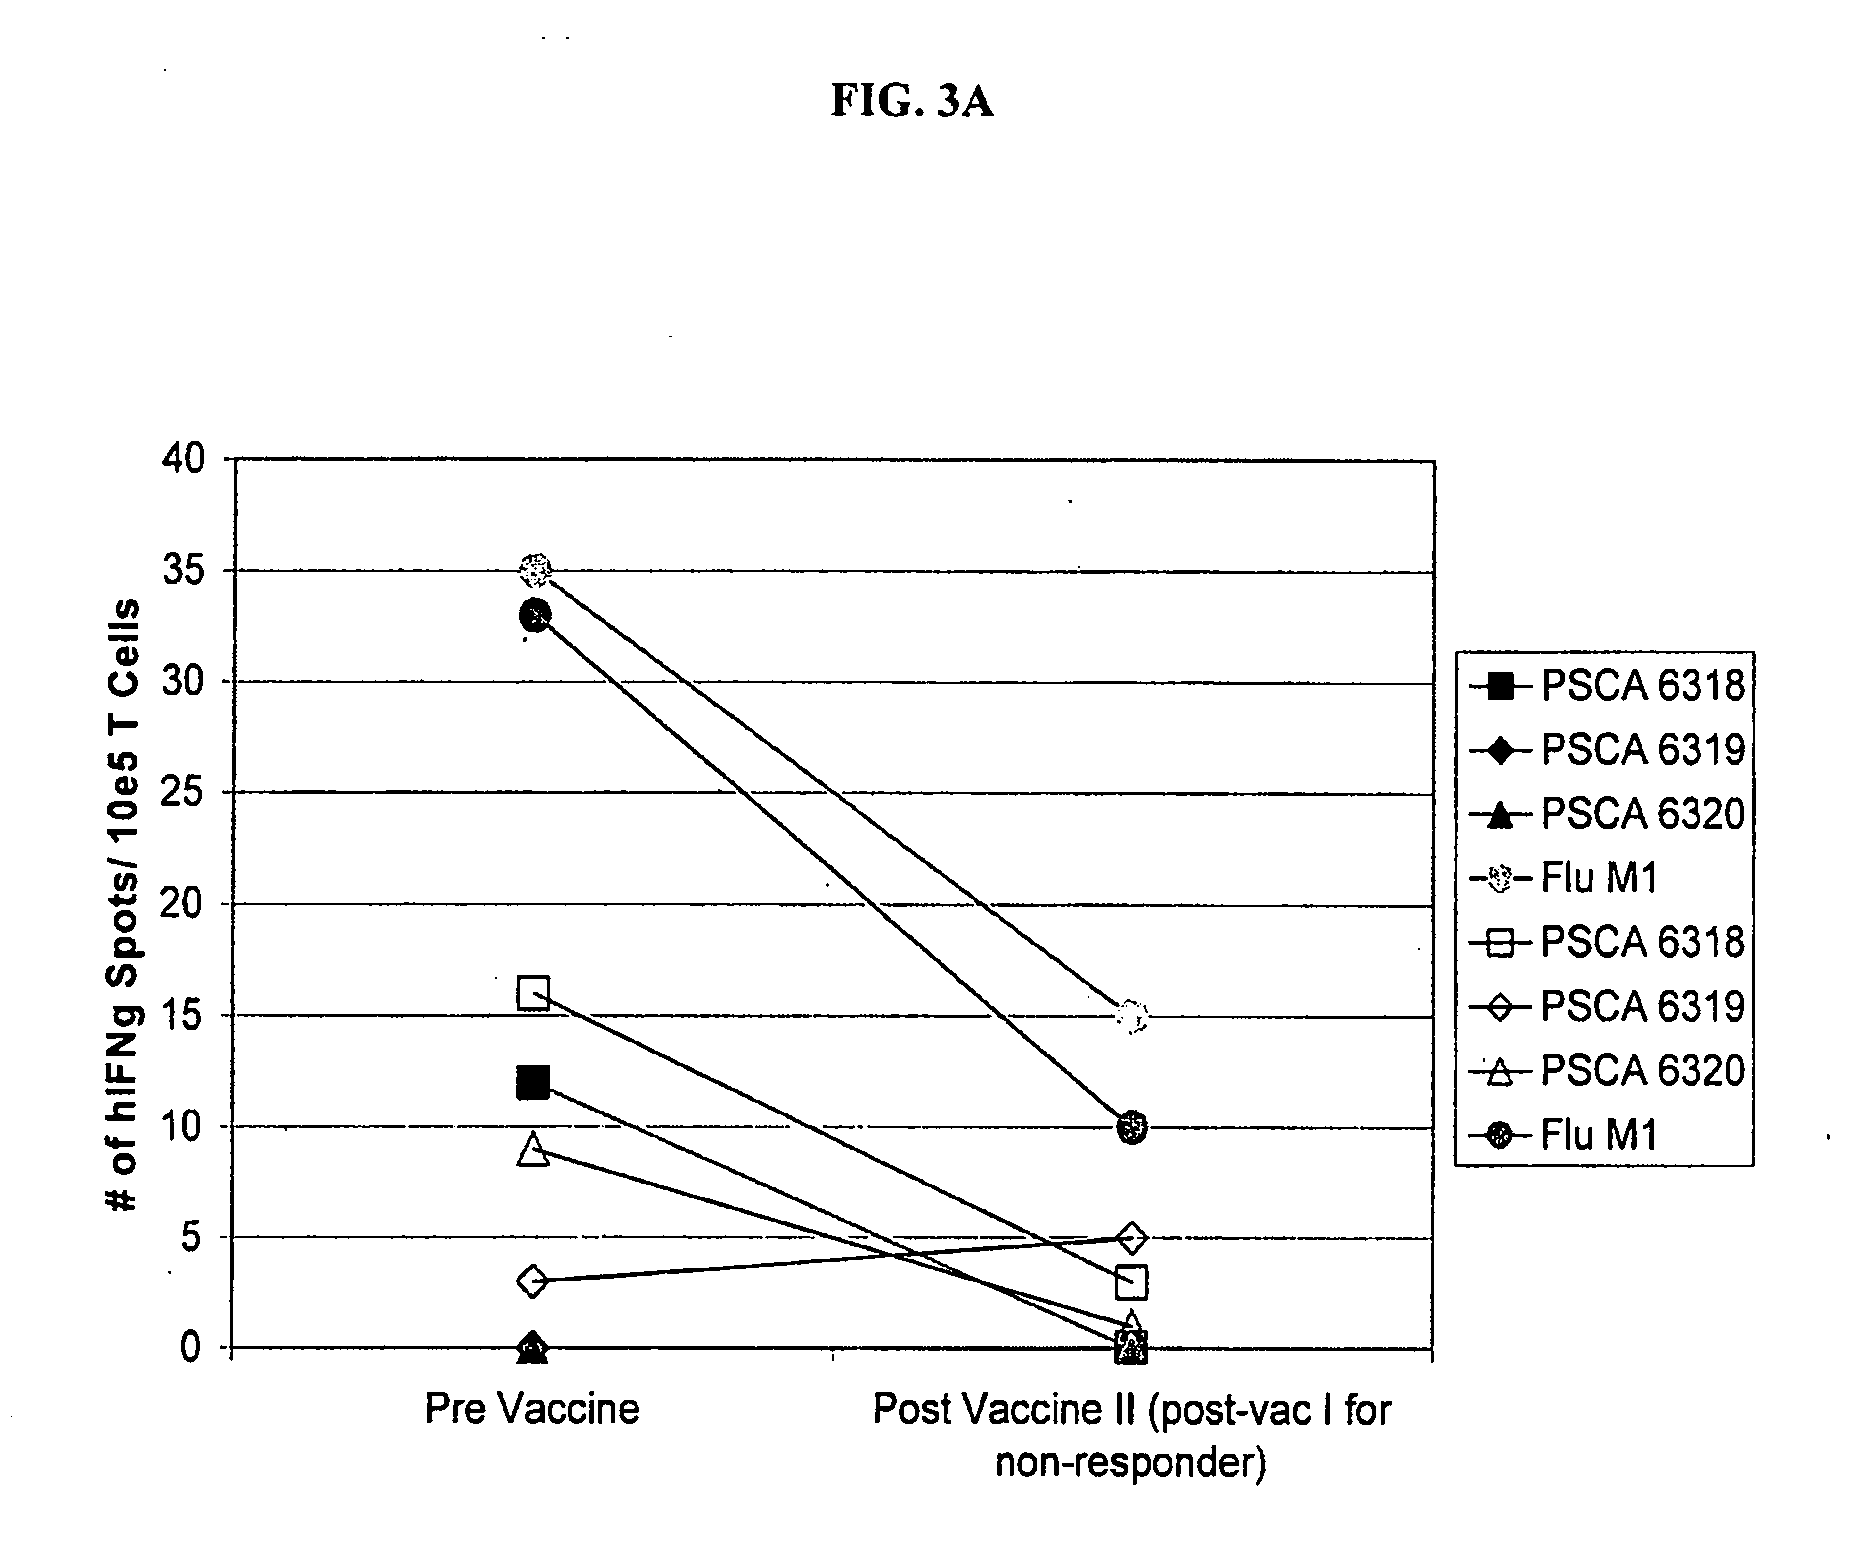 Prostate stem cell antigen vaccines and uses thereof